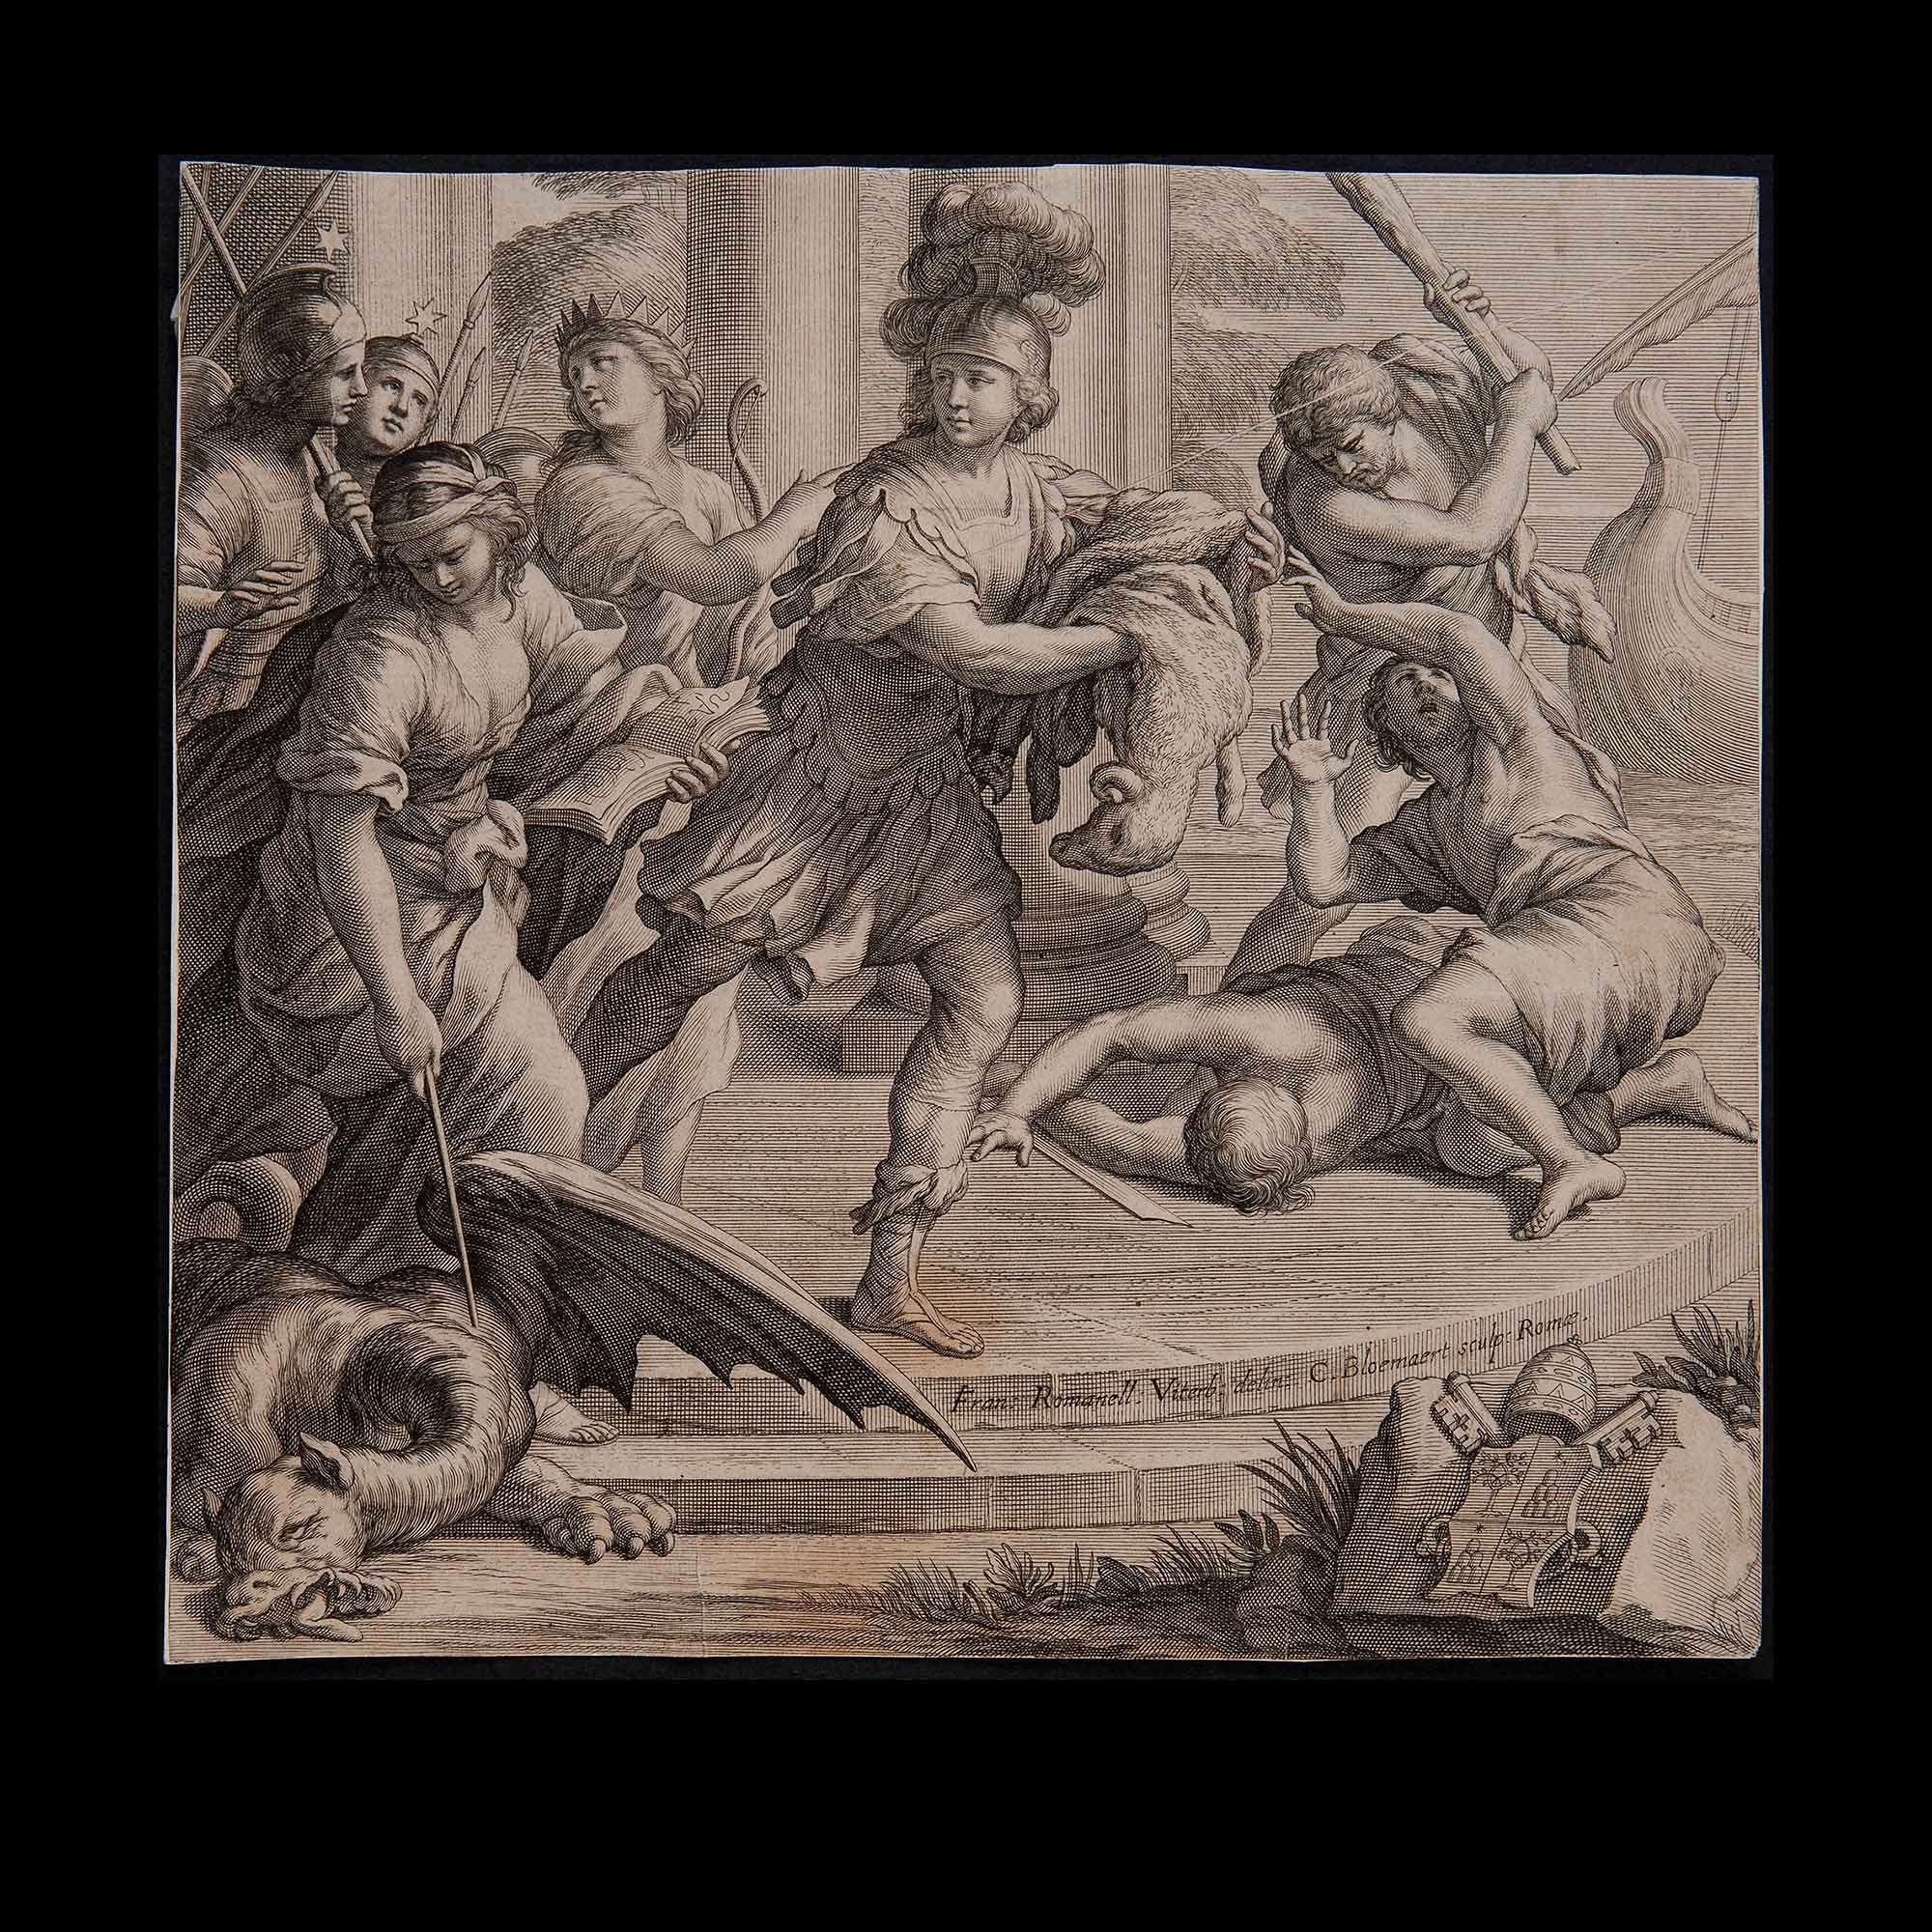 Jason escapes from Colchis with the Golden Fleece by Cornelius Bloemaert II, 17th century